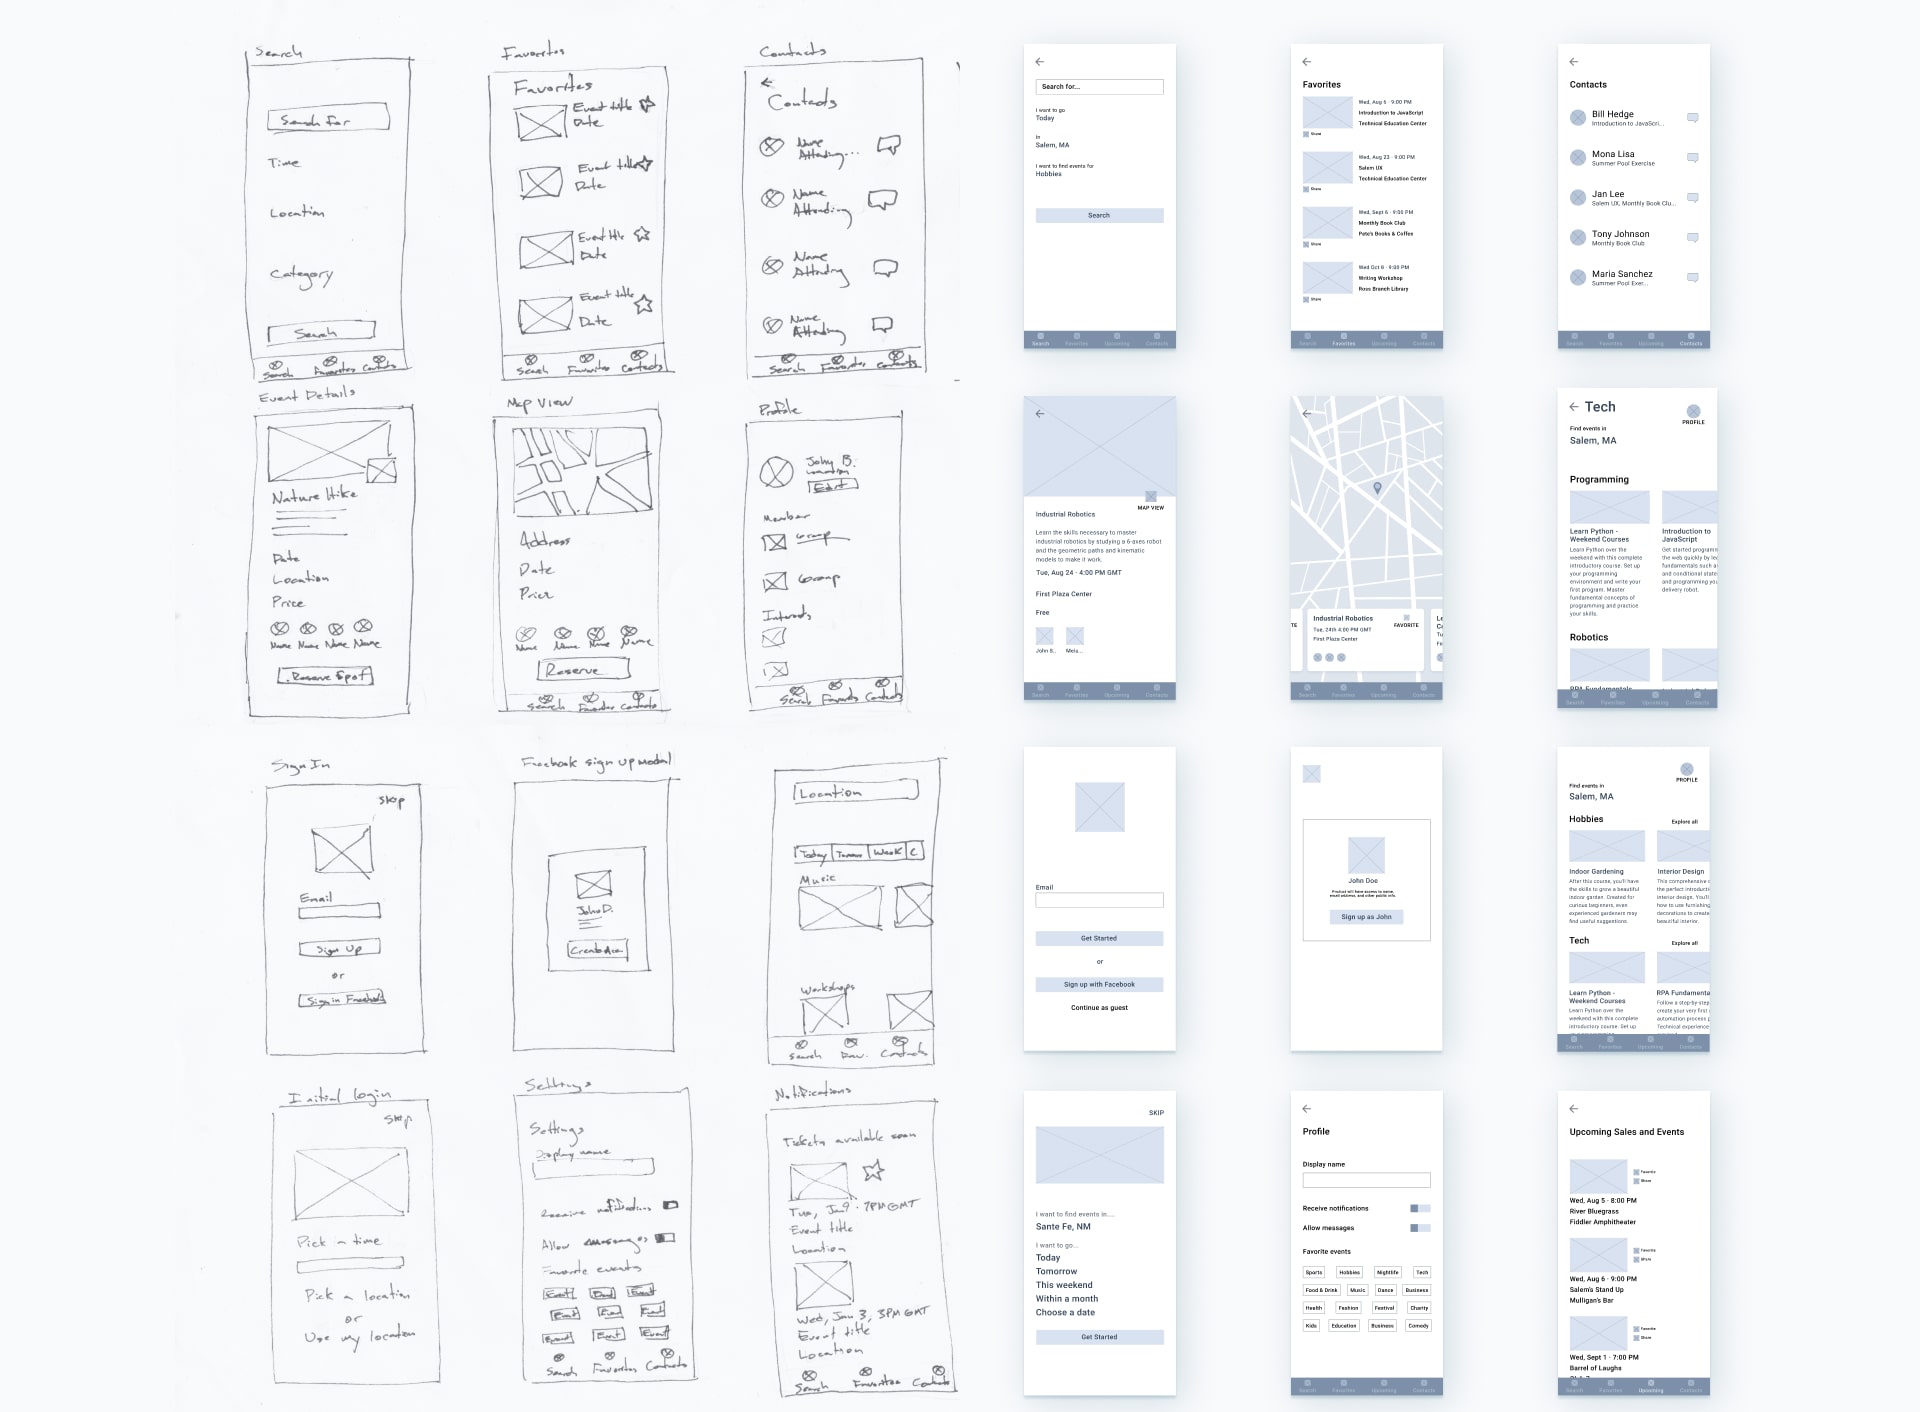 Pen and paper sketches alongside digital low fidelity wireframes